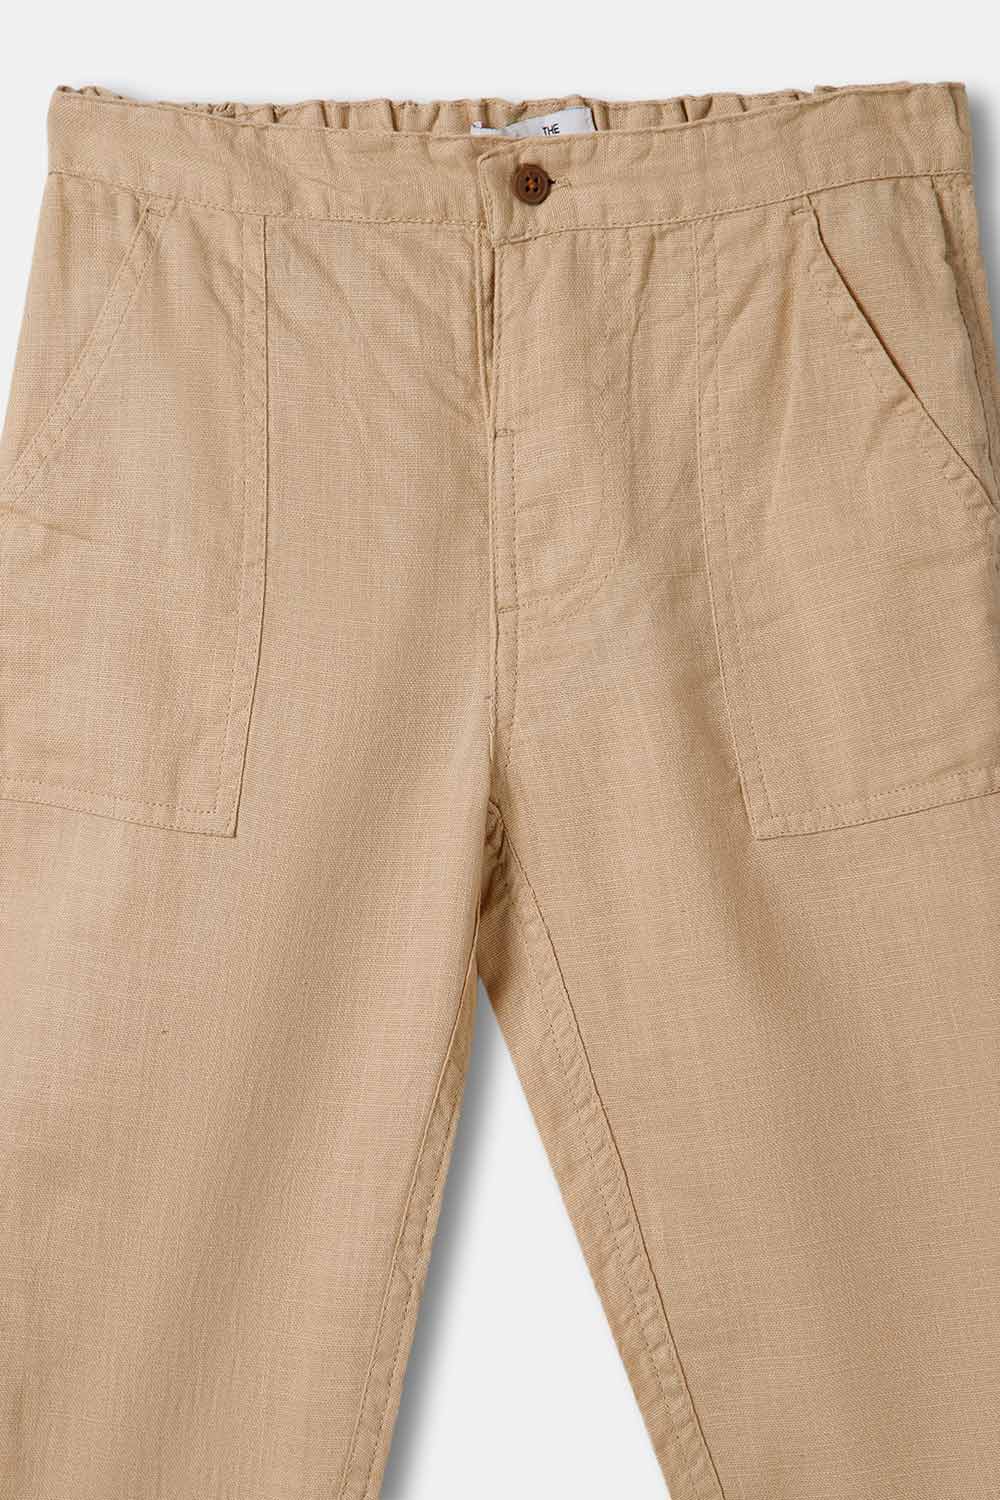 The Young Future  Pants for Boys  - Beige  - BT03